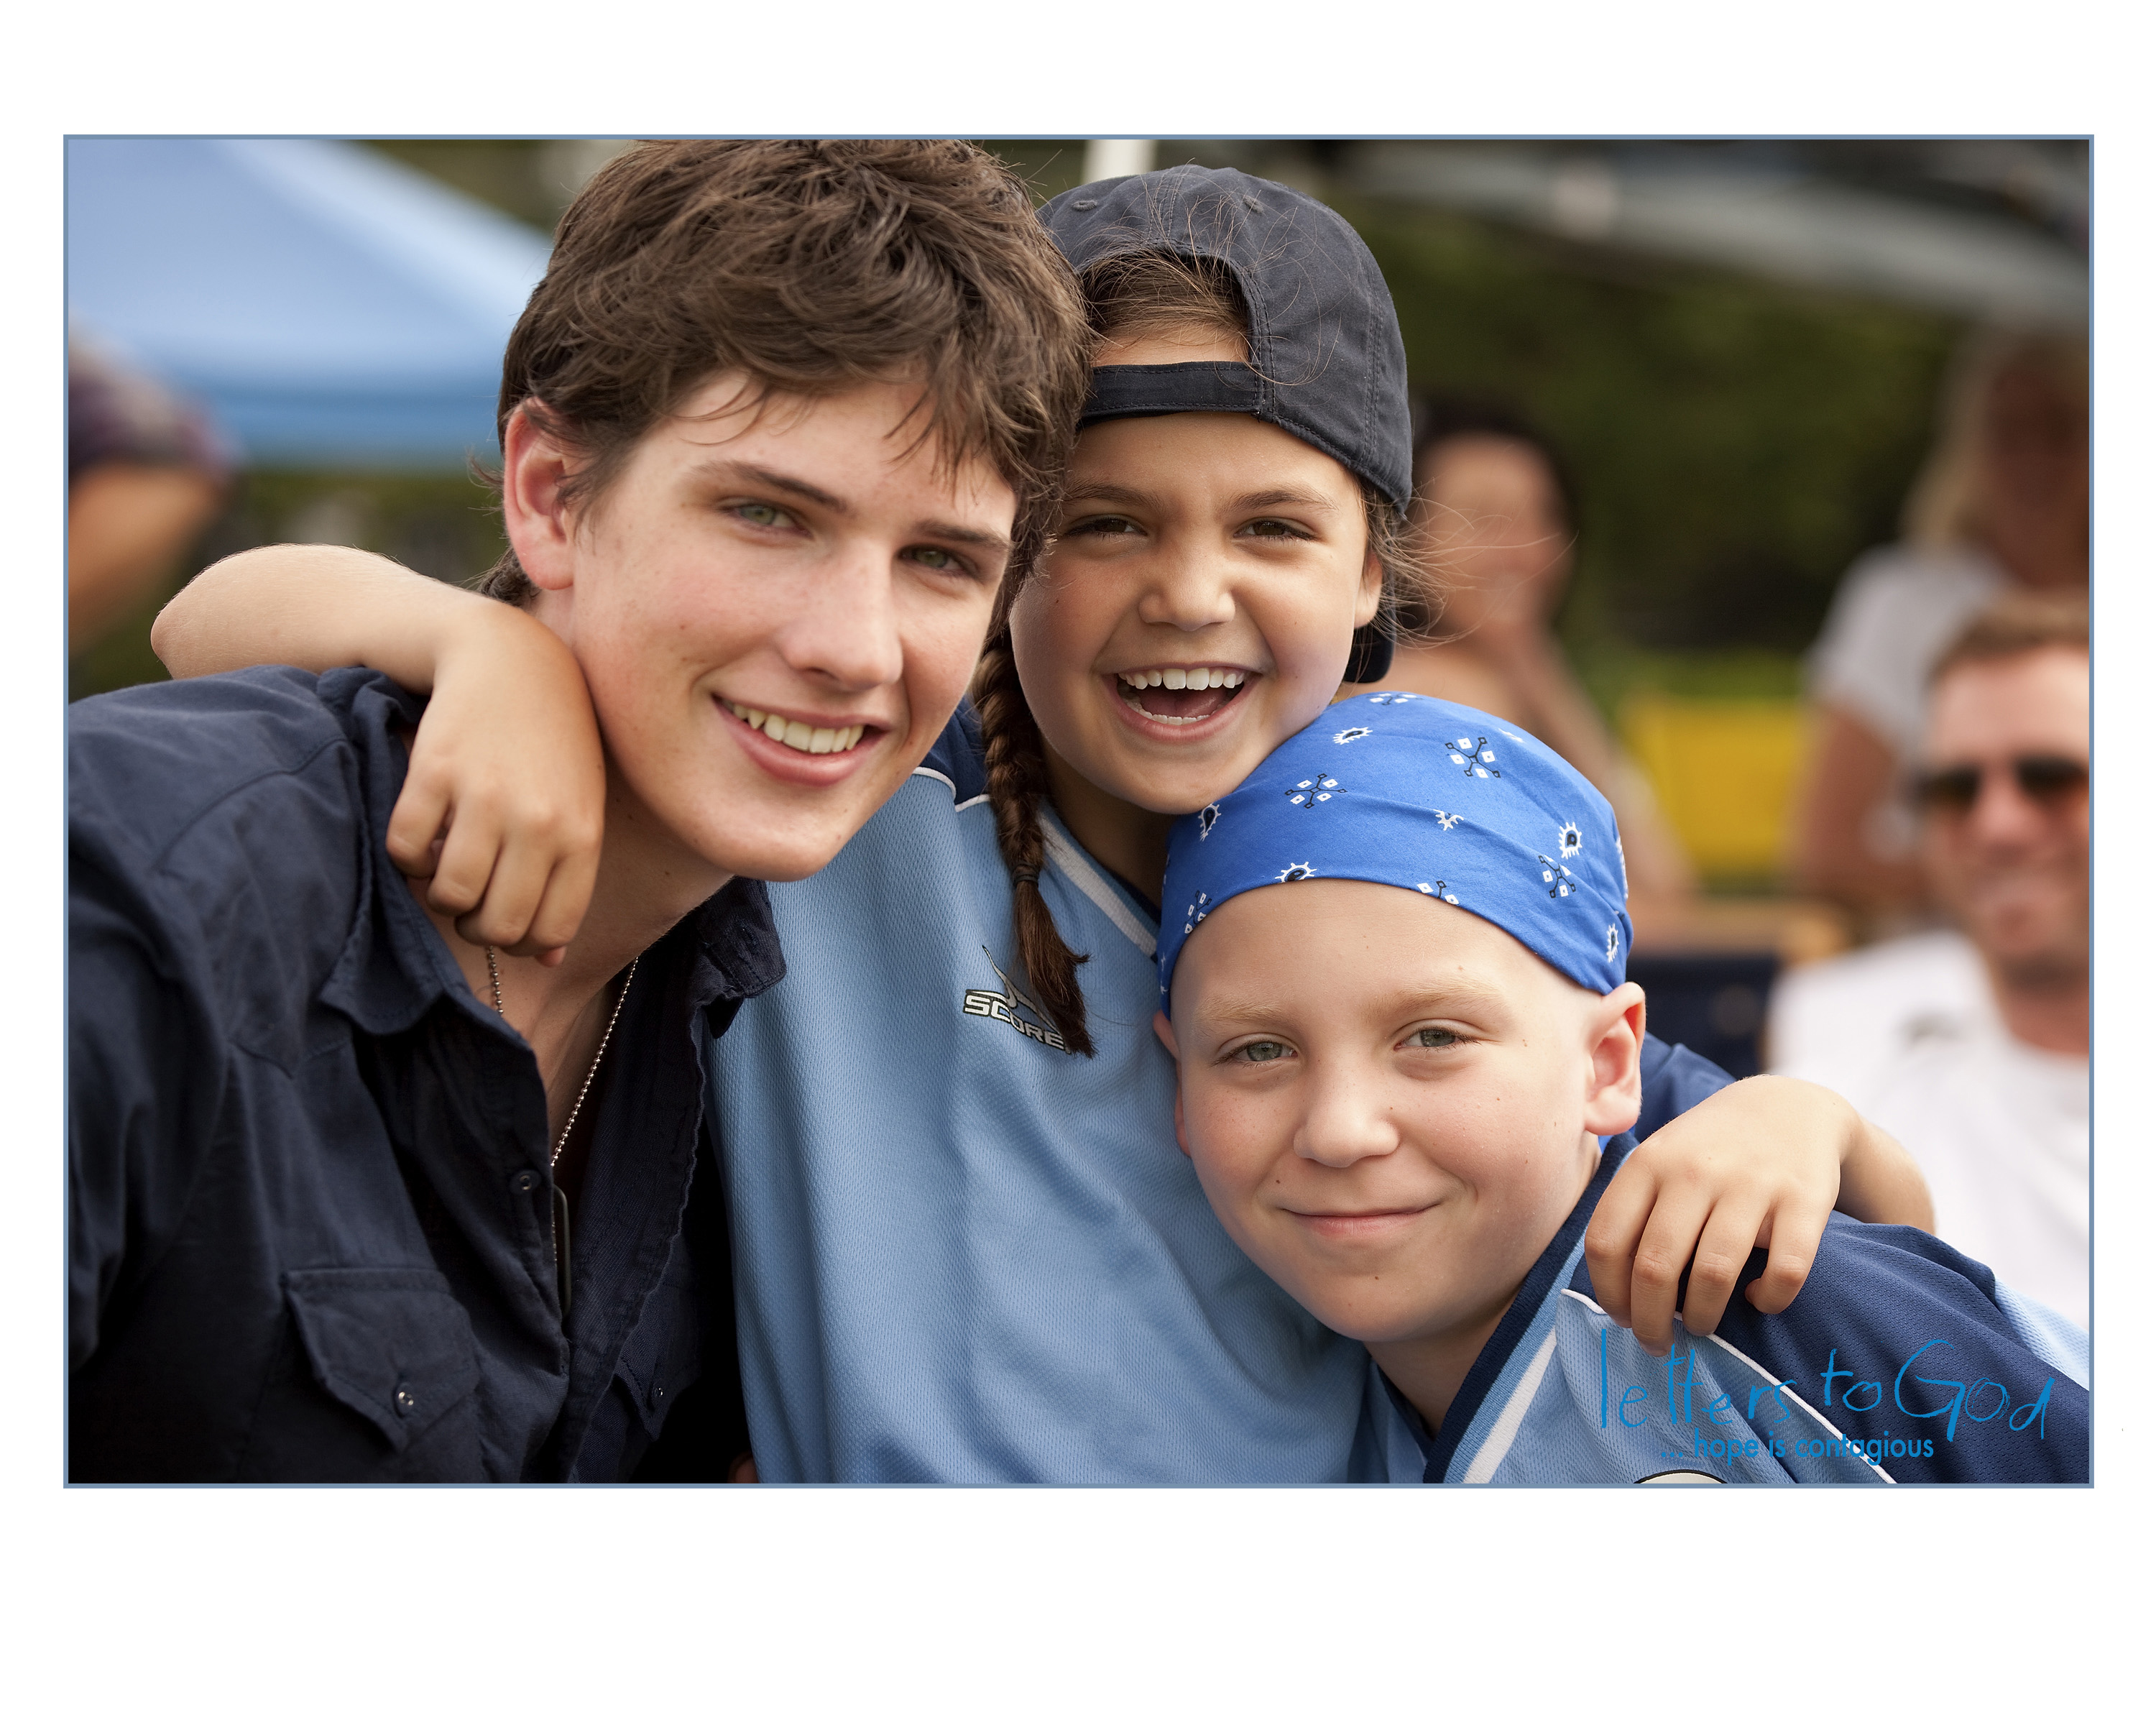 Michael Bolten, Bailee Madison, Tanner Maquire on set filming 